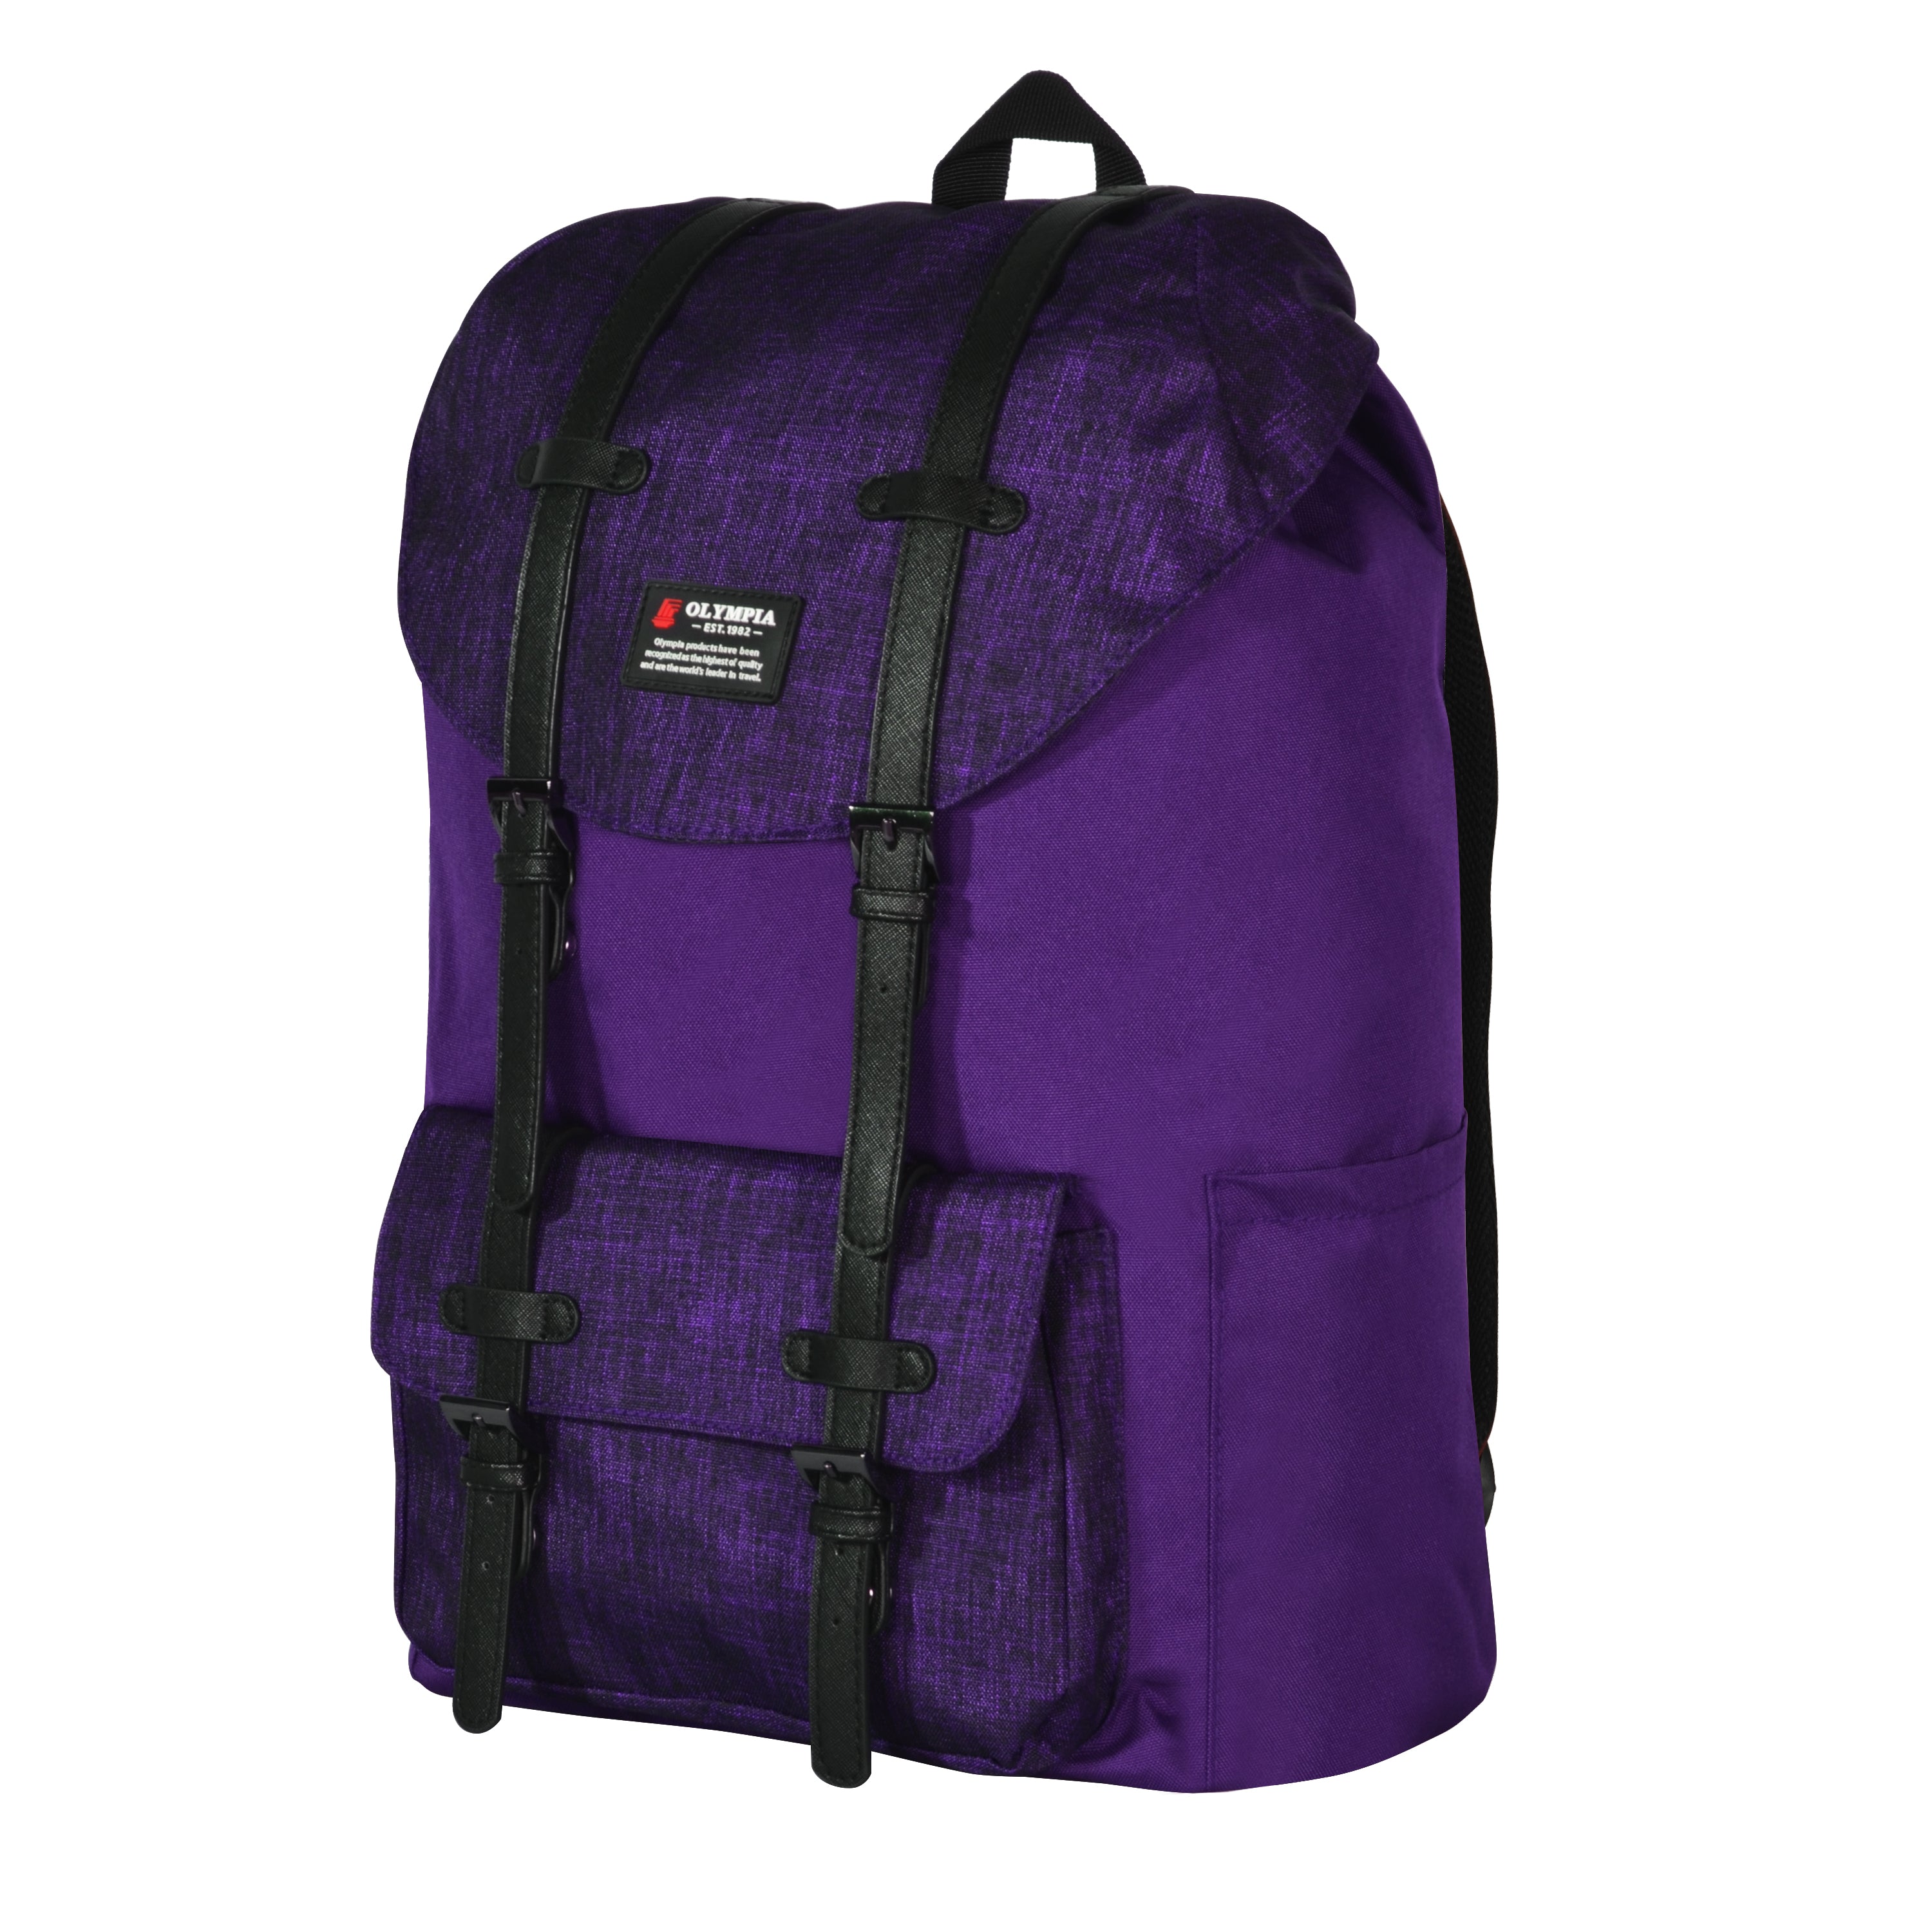 Cambridge Lightweight Backpack with Laptop Compartment